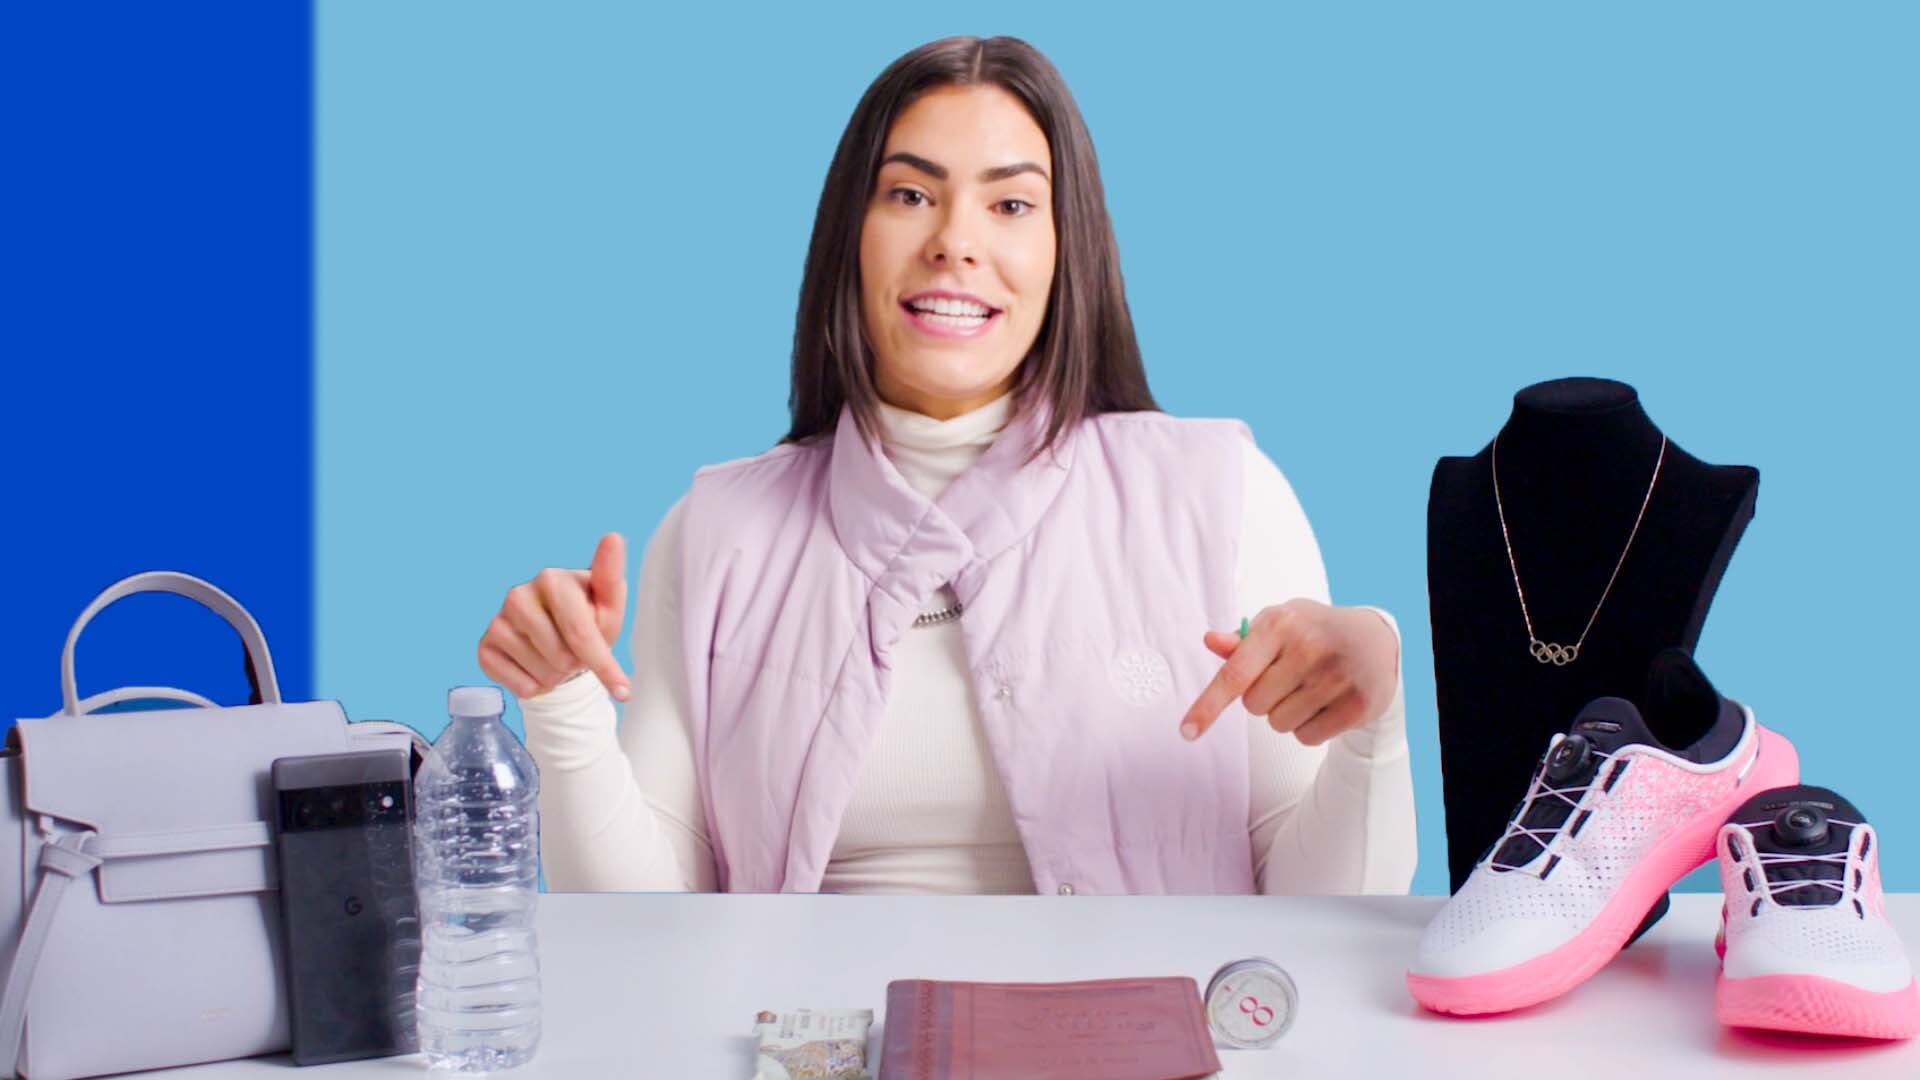 Watch 10 Things WNBA Star Kelsey Plum Can't Live Without, 10 Essentials